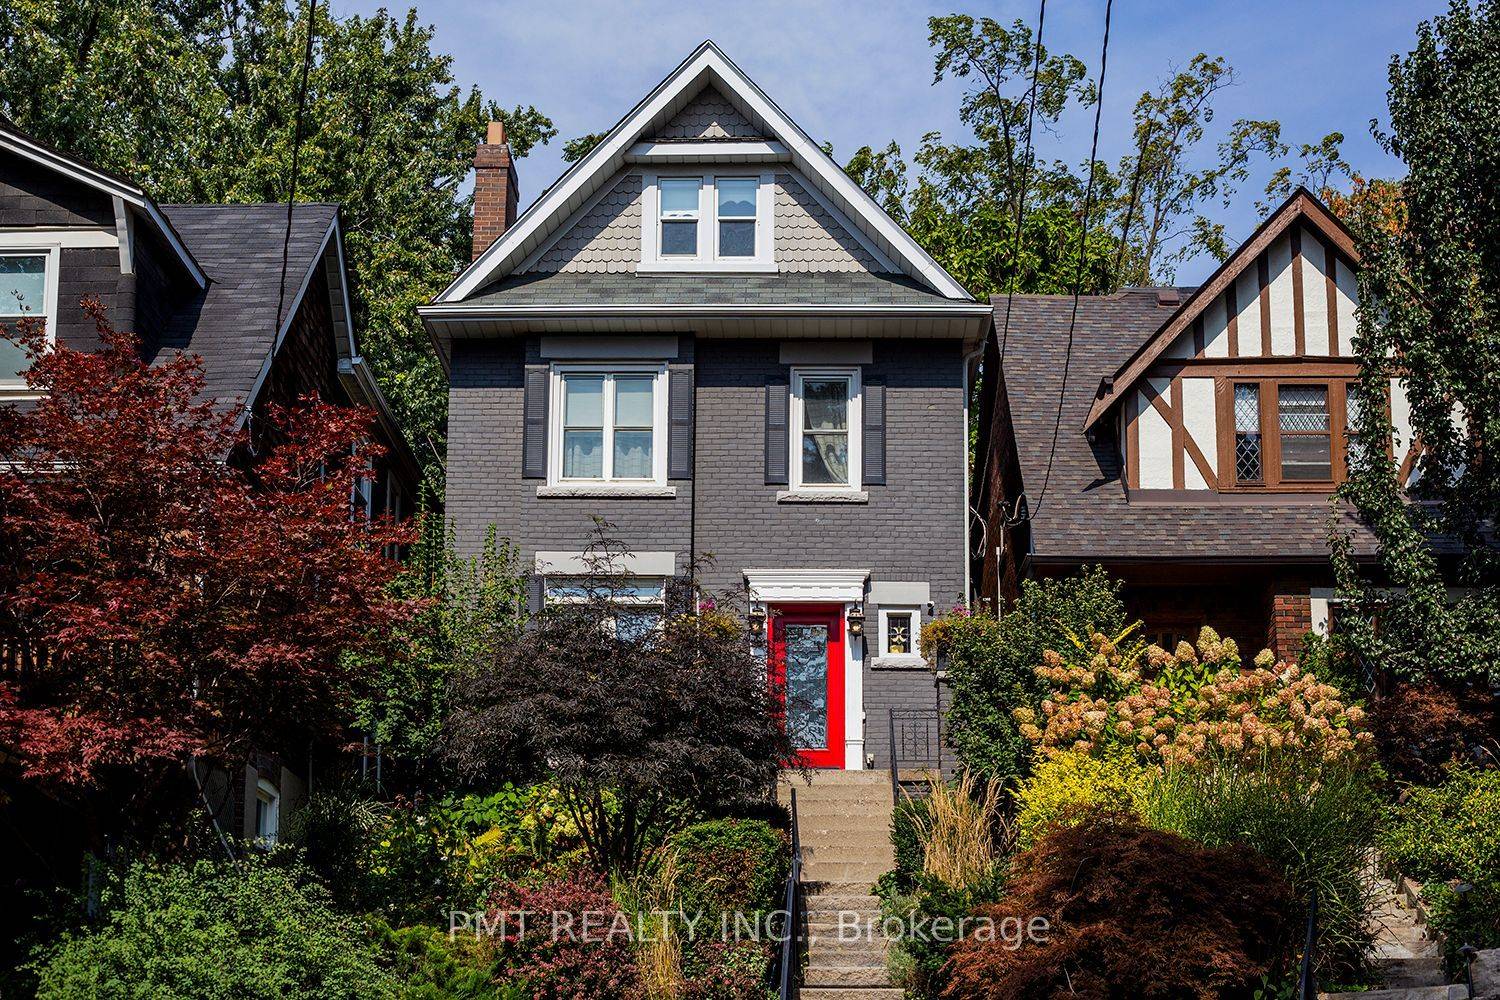 A Stunning And Beautiful Turn Of The Century Home Located In North Riverdale !